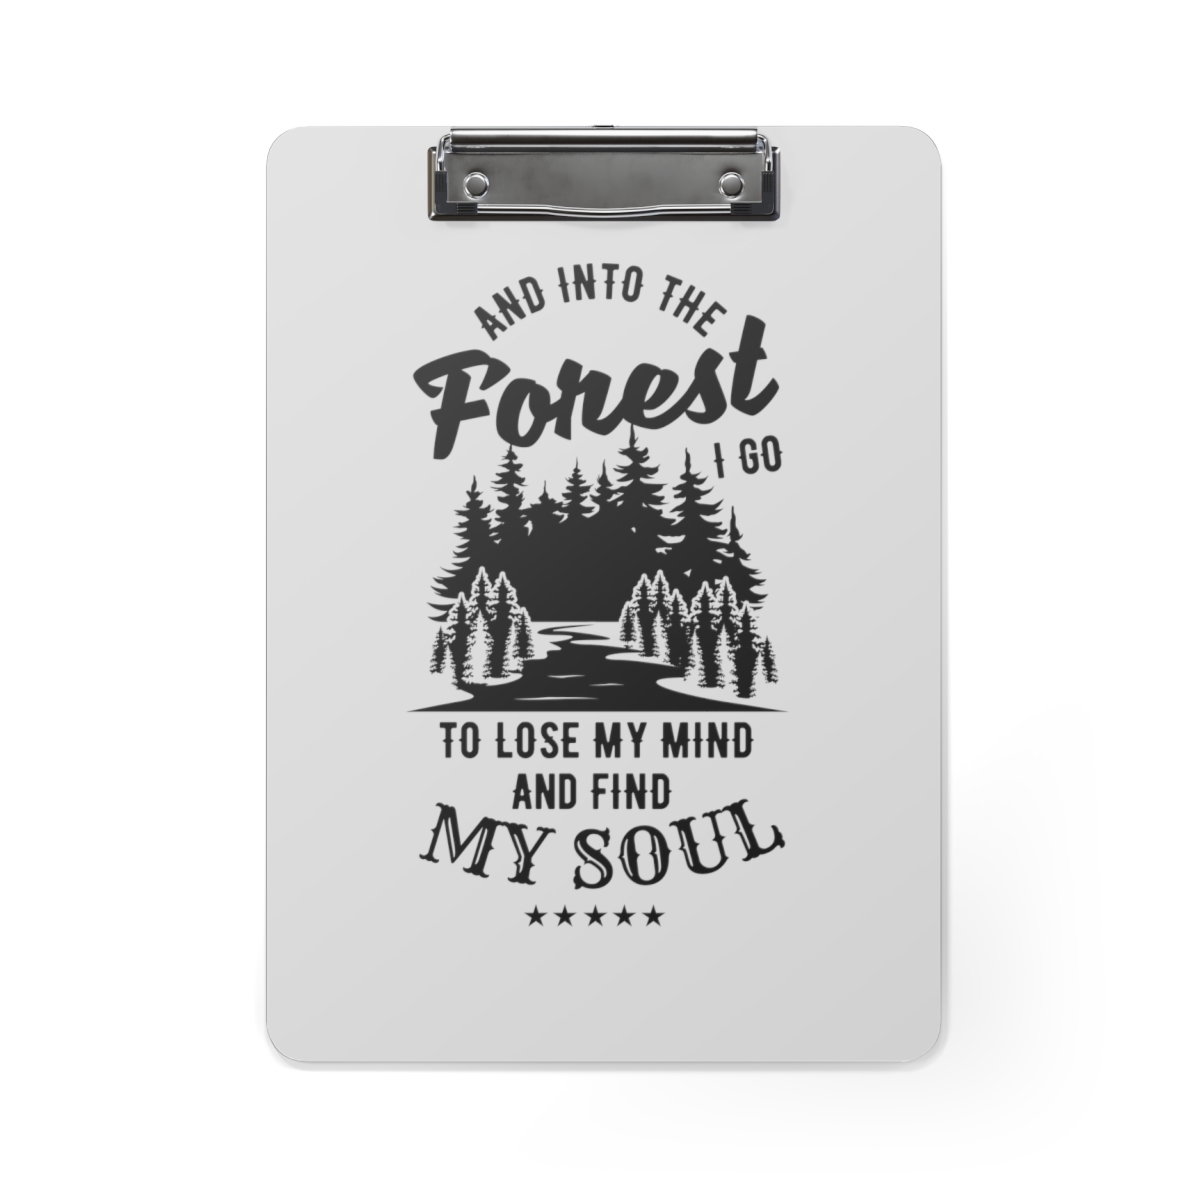 Personalized Motivational Clipboard - Forest Quote - Adventure Into the Wild - N - $48.41